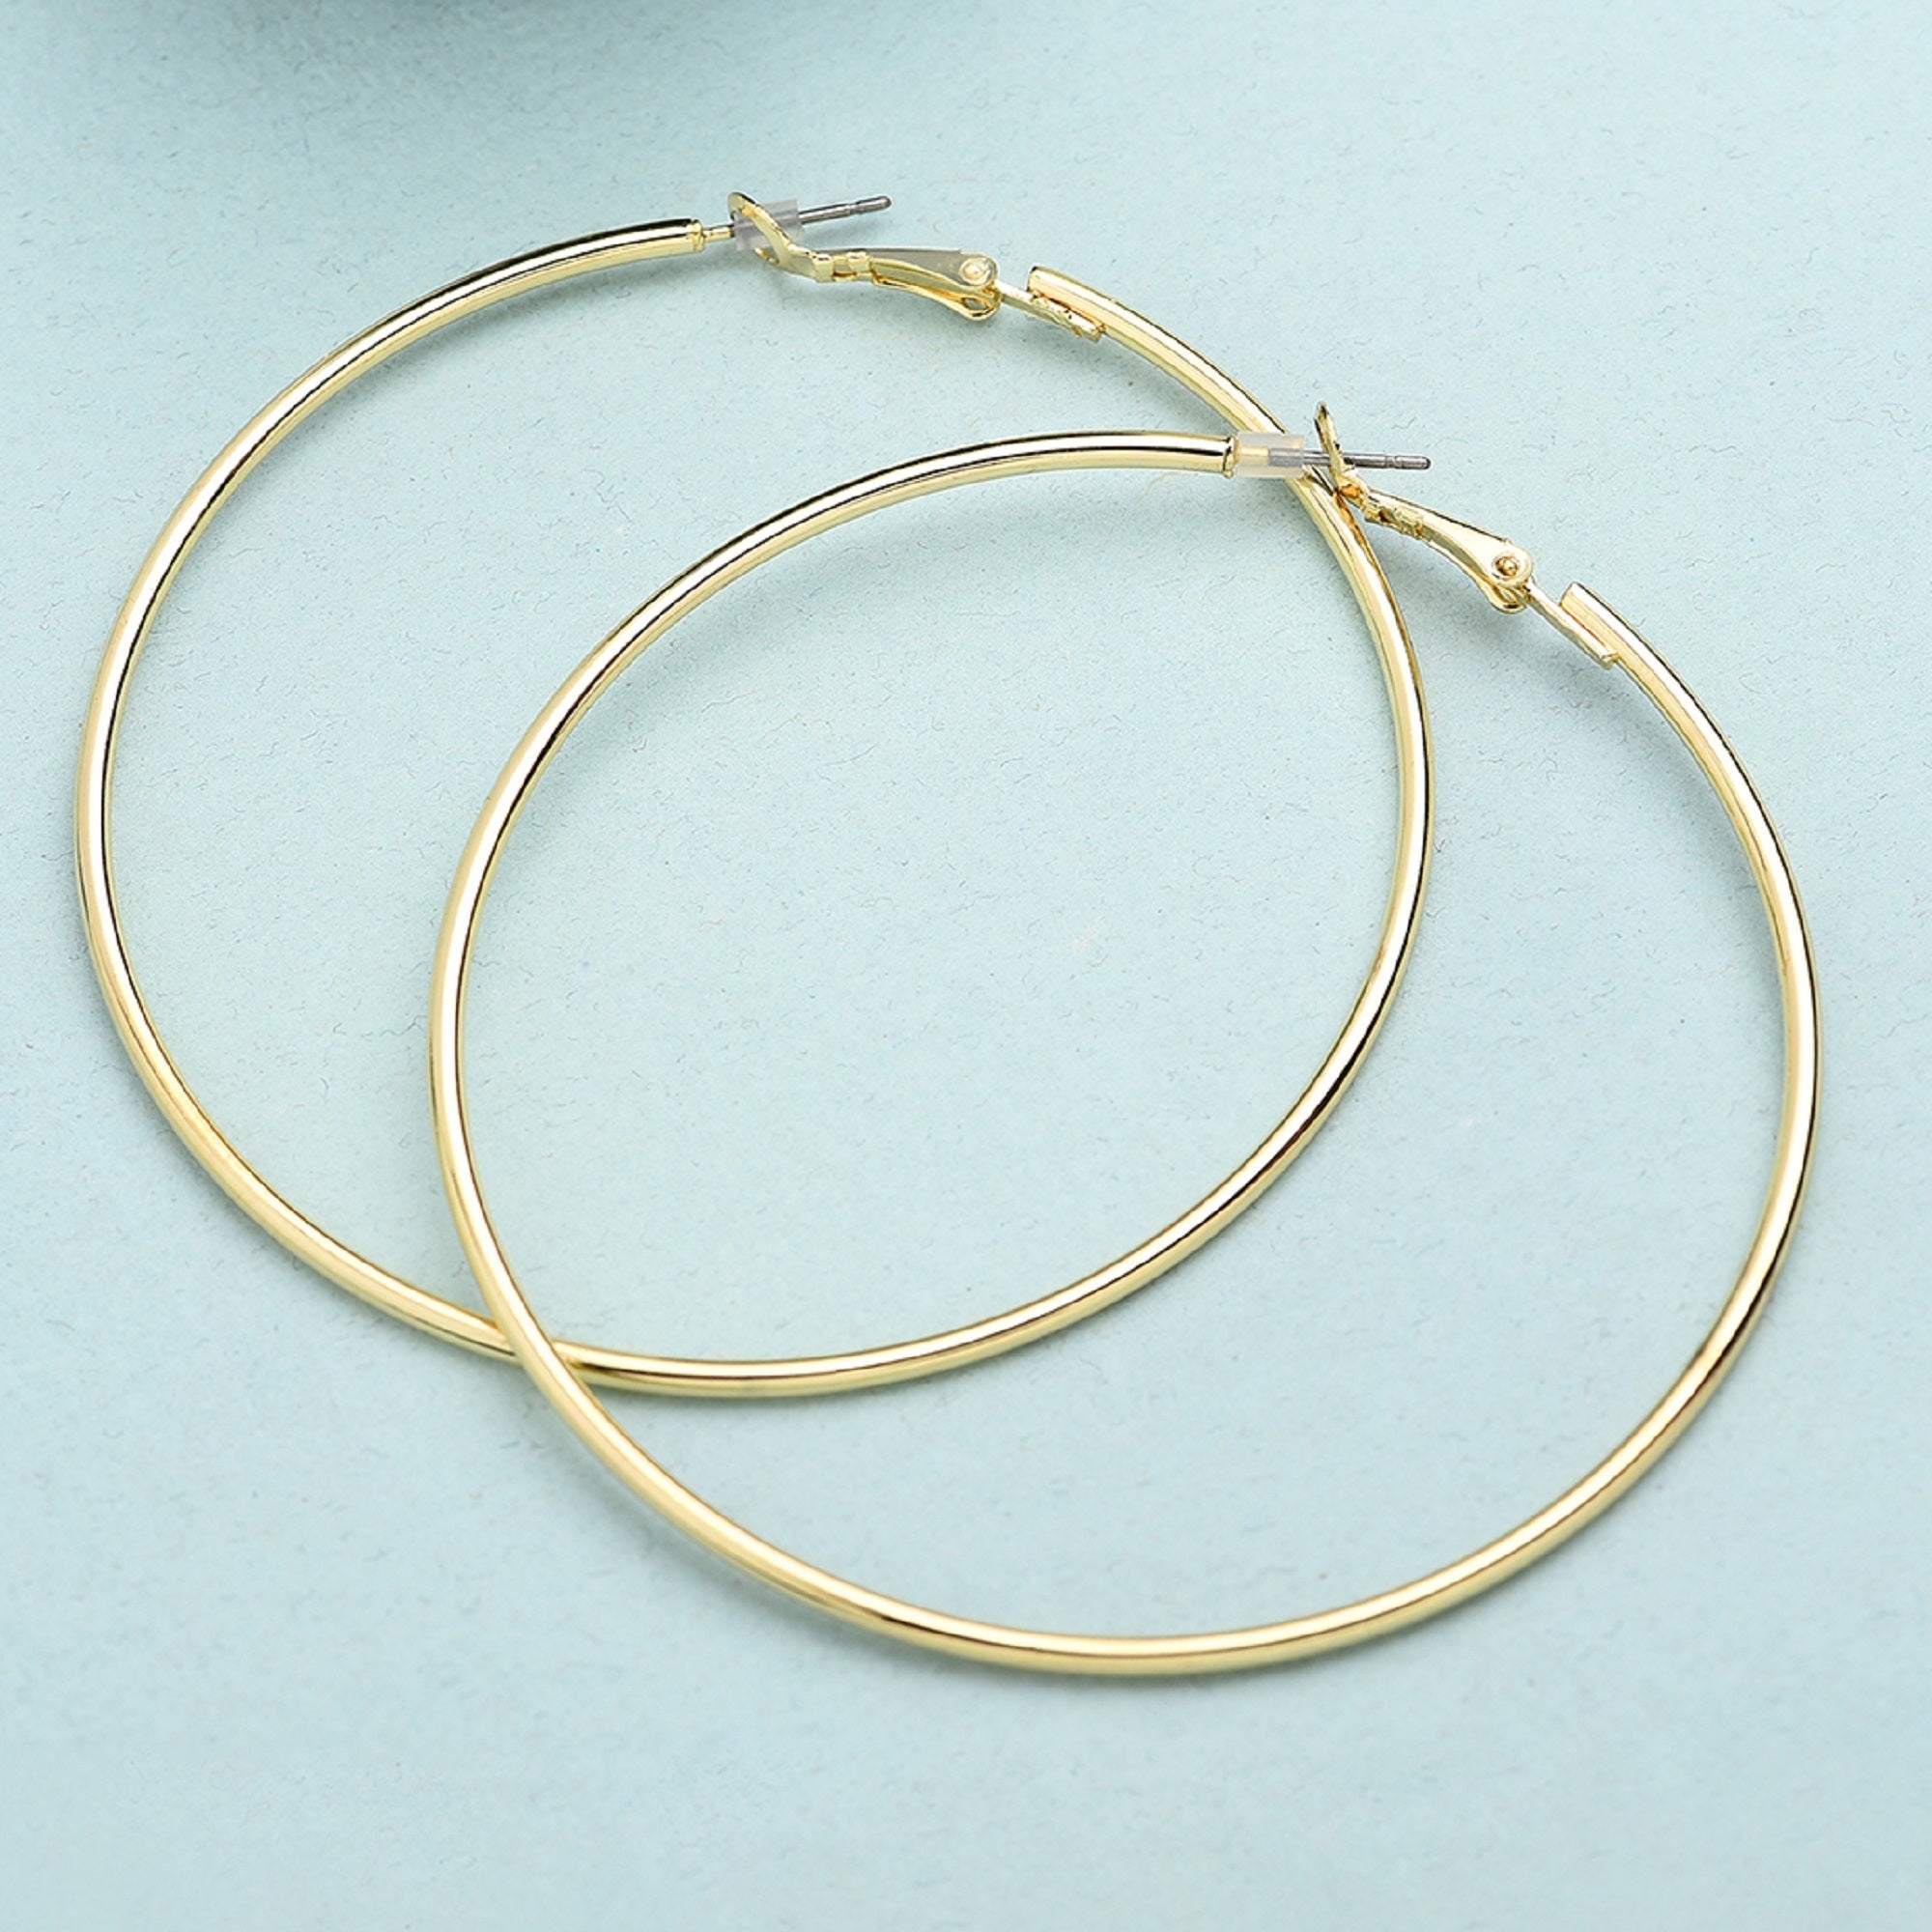 24k Yellow Gold Carved Braided Gold Hoop Earrings 18mm Lady Womens Fine  Gift On Birthdays 100% Real Nickel From China G255H From Pedmg, $17.16 |  DHgate.Com